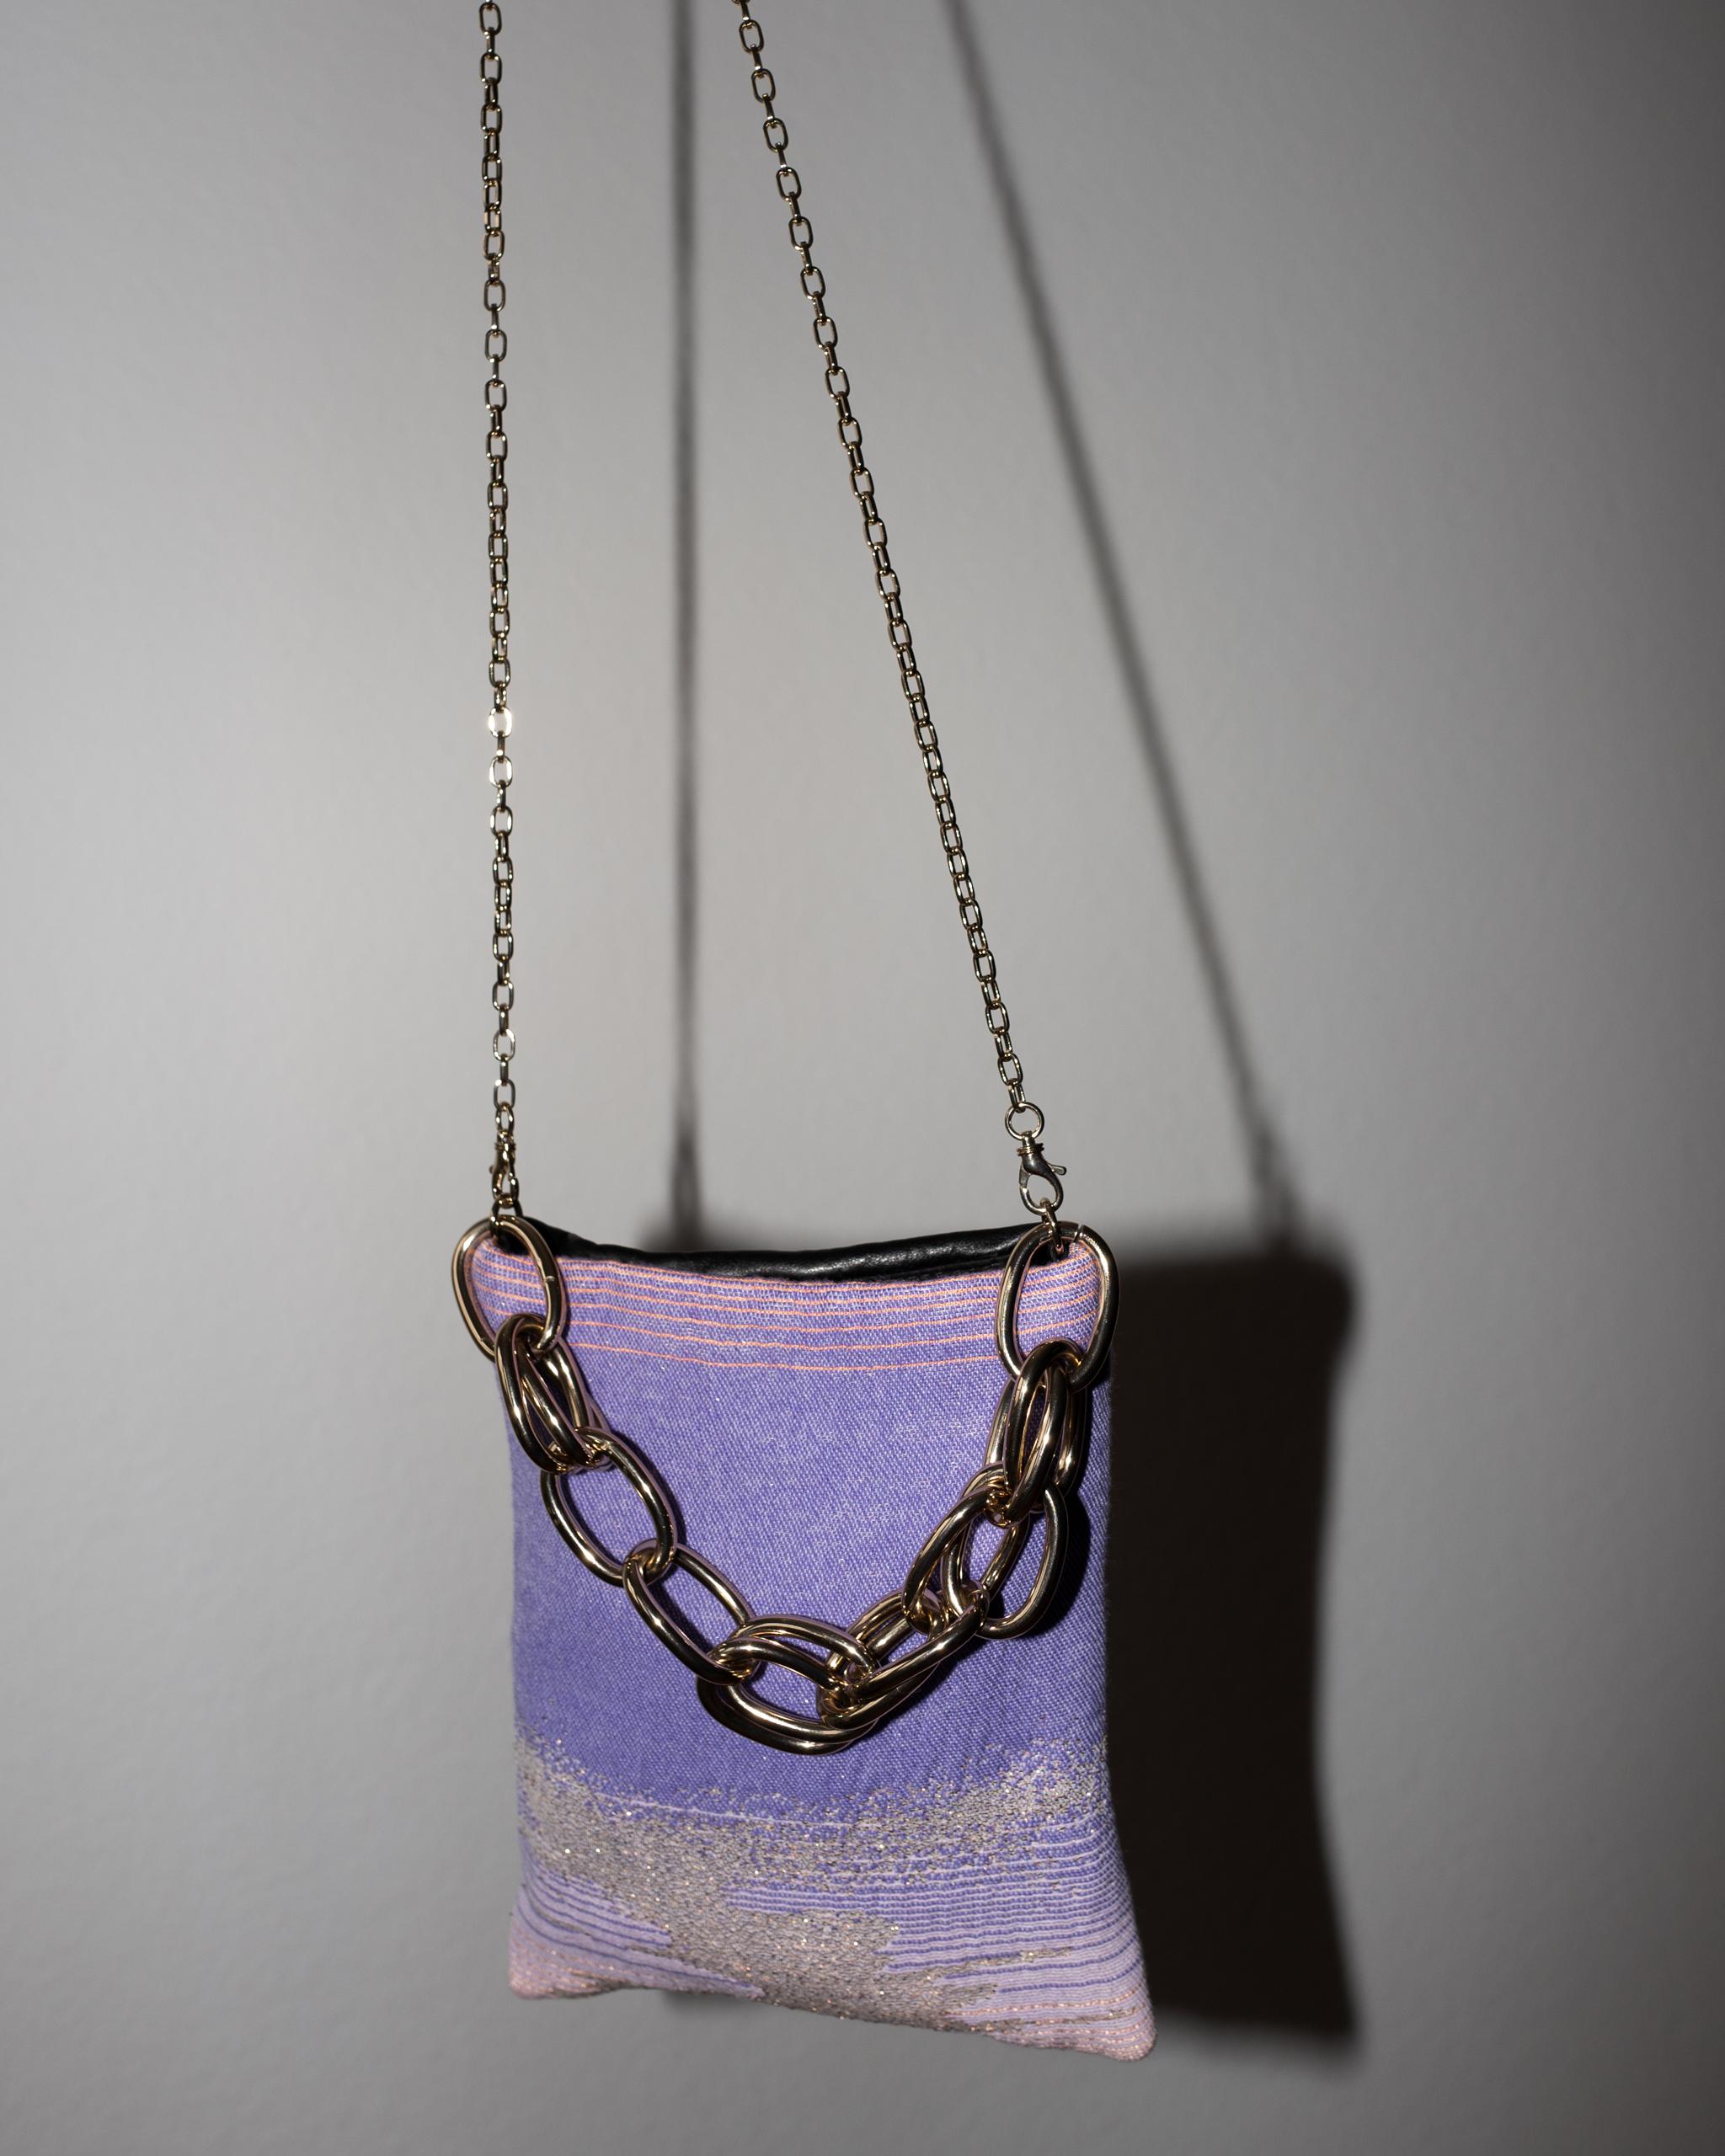 Women's Evening Shoulder Bag Pastel Lilac Pink Lurex  Black Leather Gold Chunky Chain